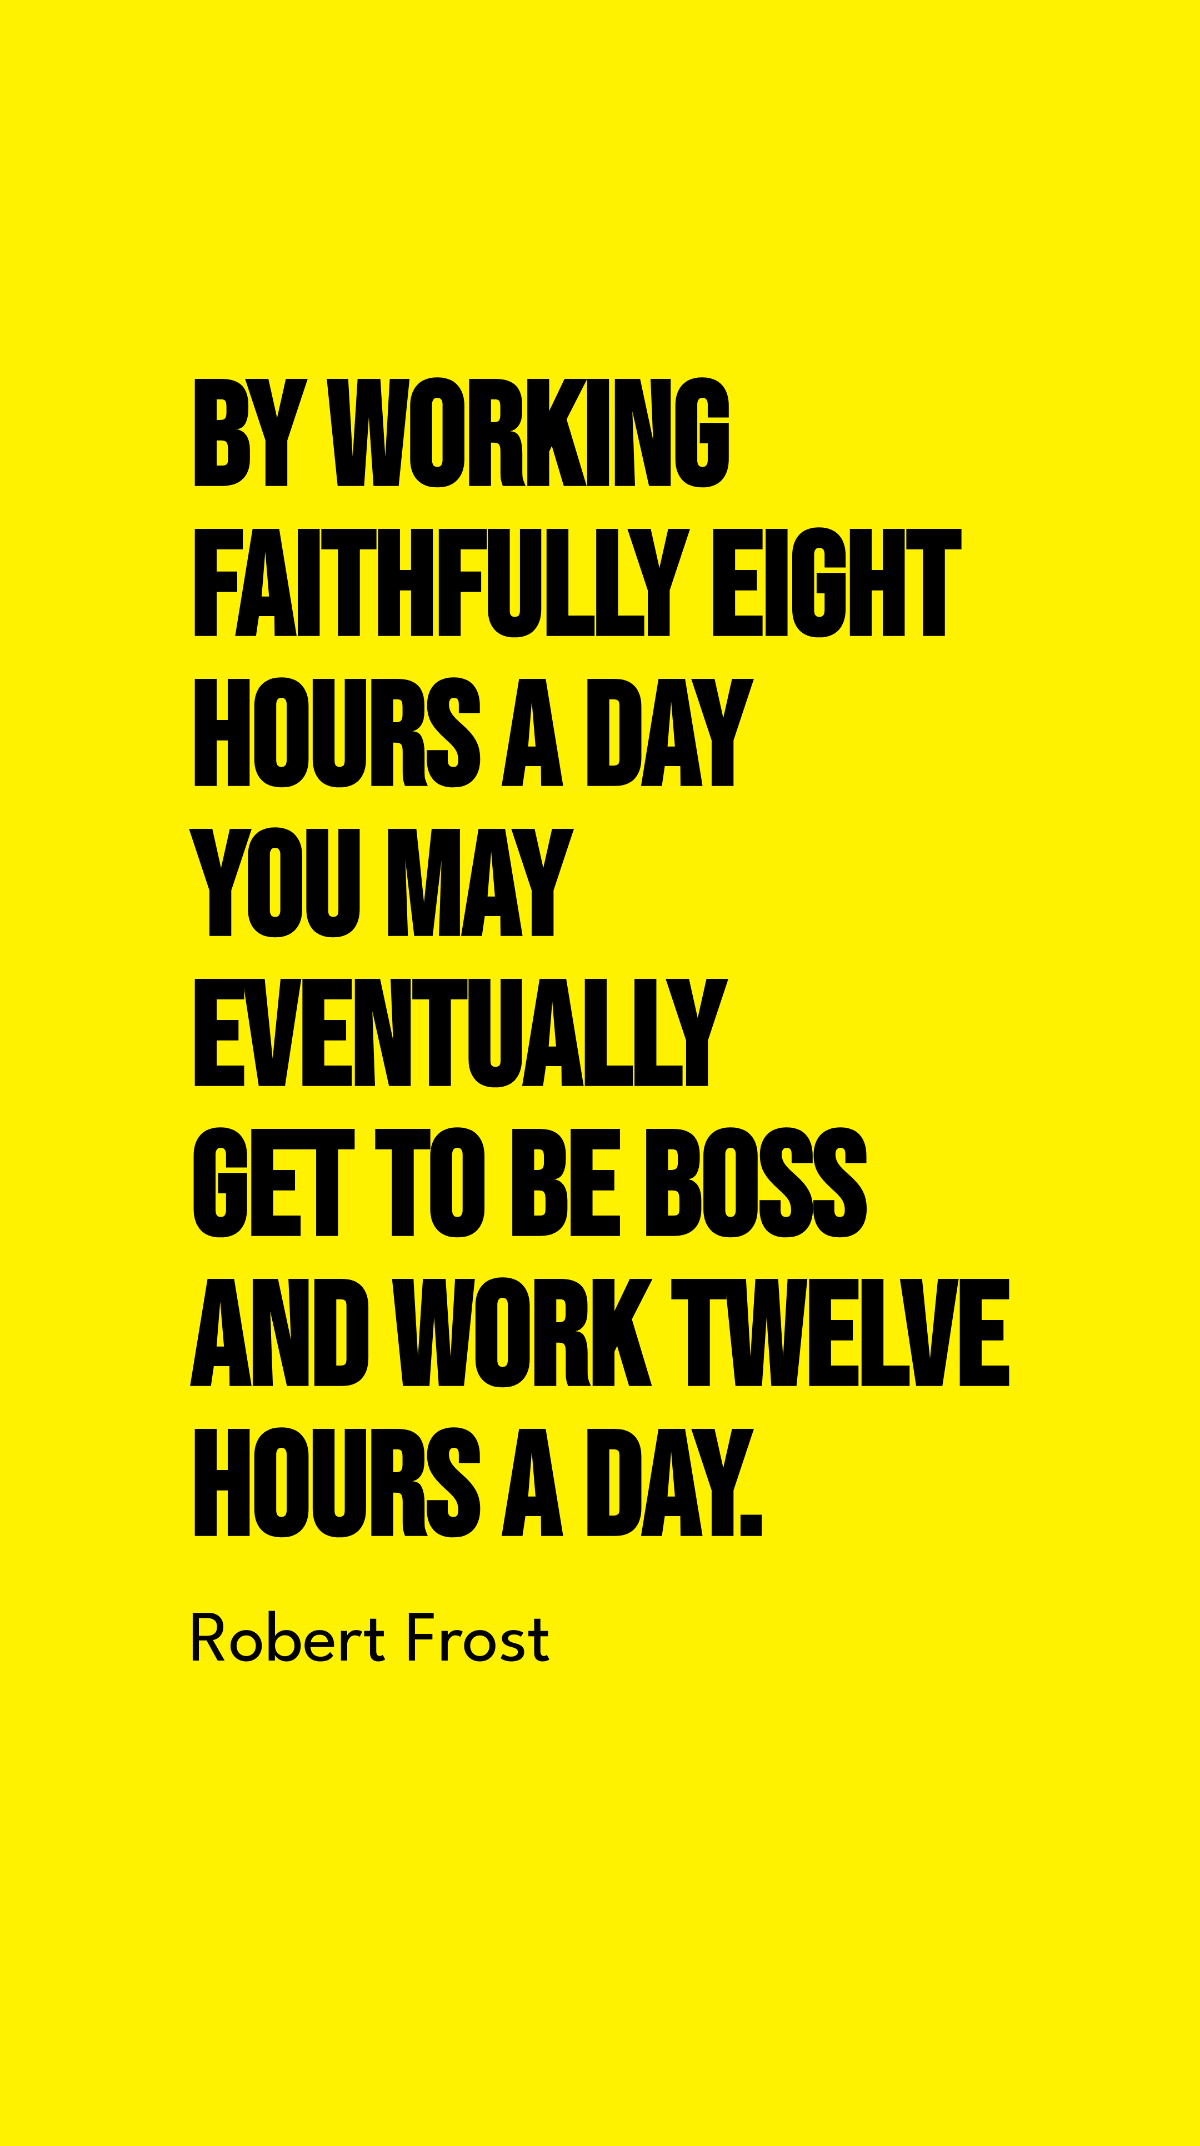 Robert Frost - By working faithfully eight hours a day you may eventually get to be boss and work twelve hours a day.  Template